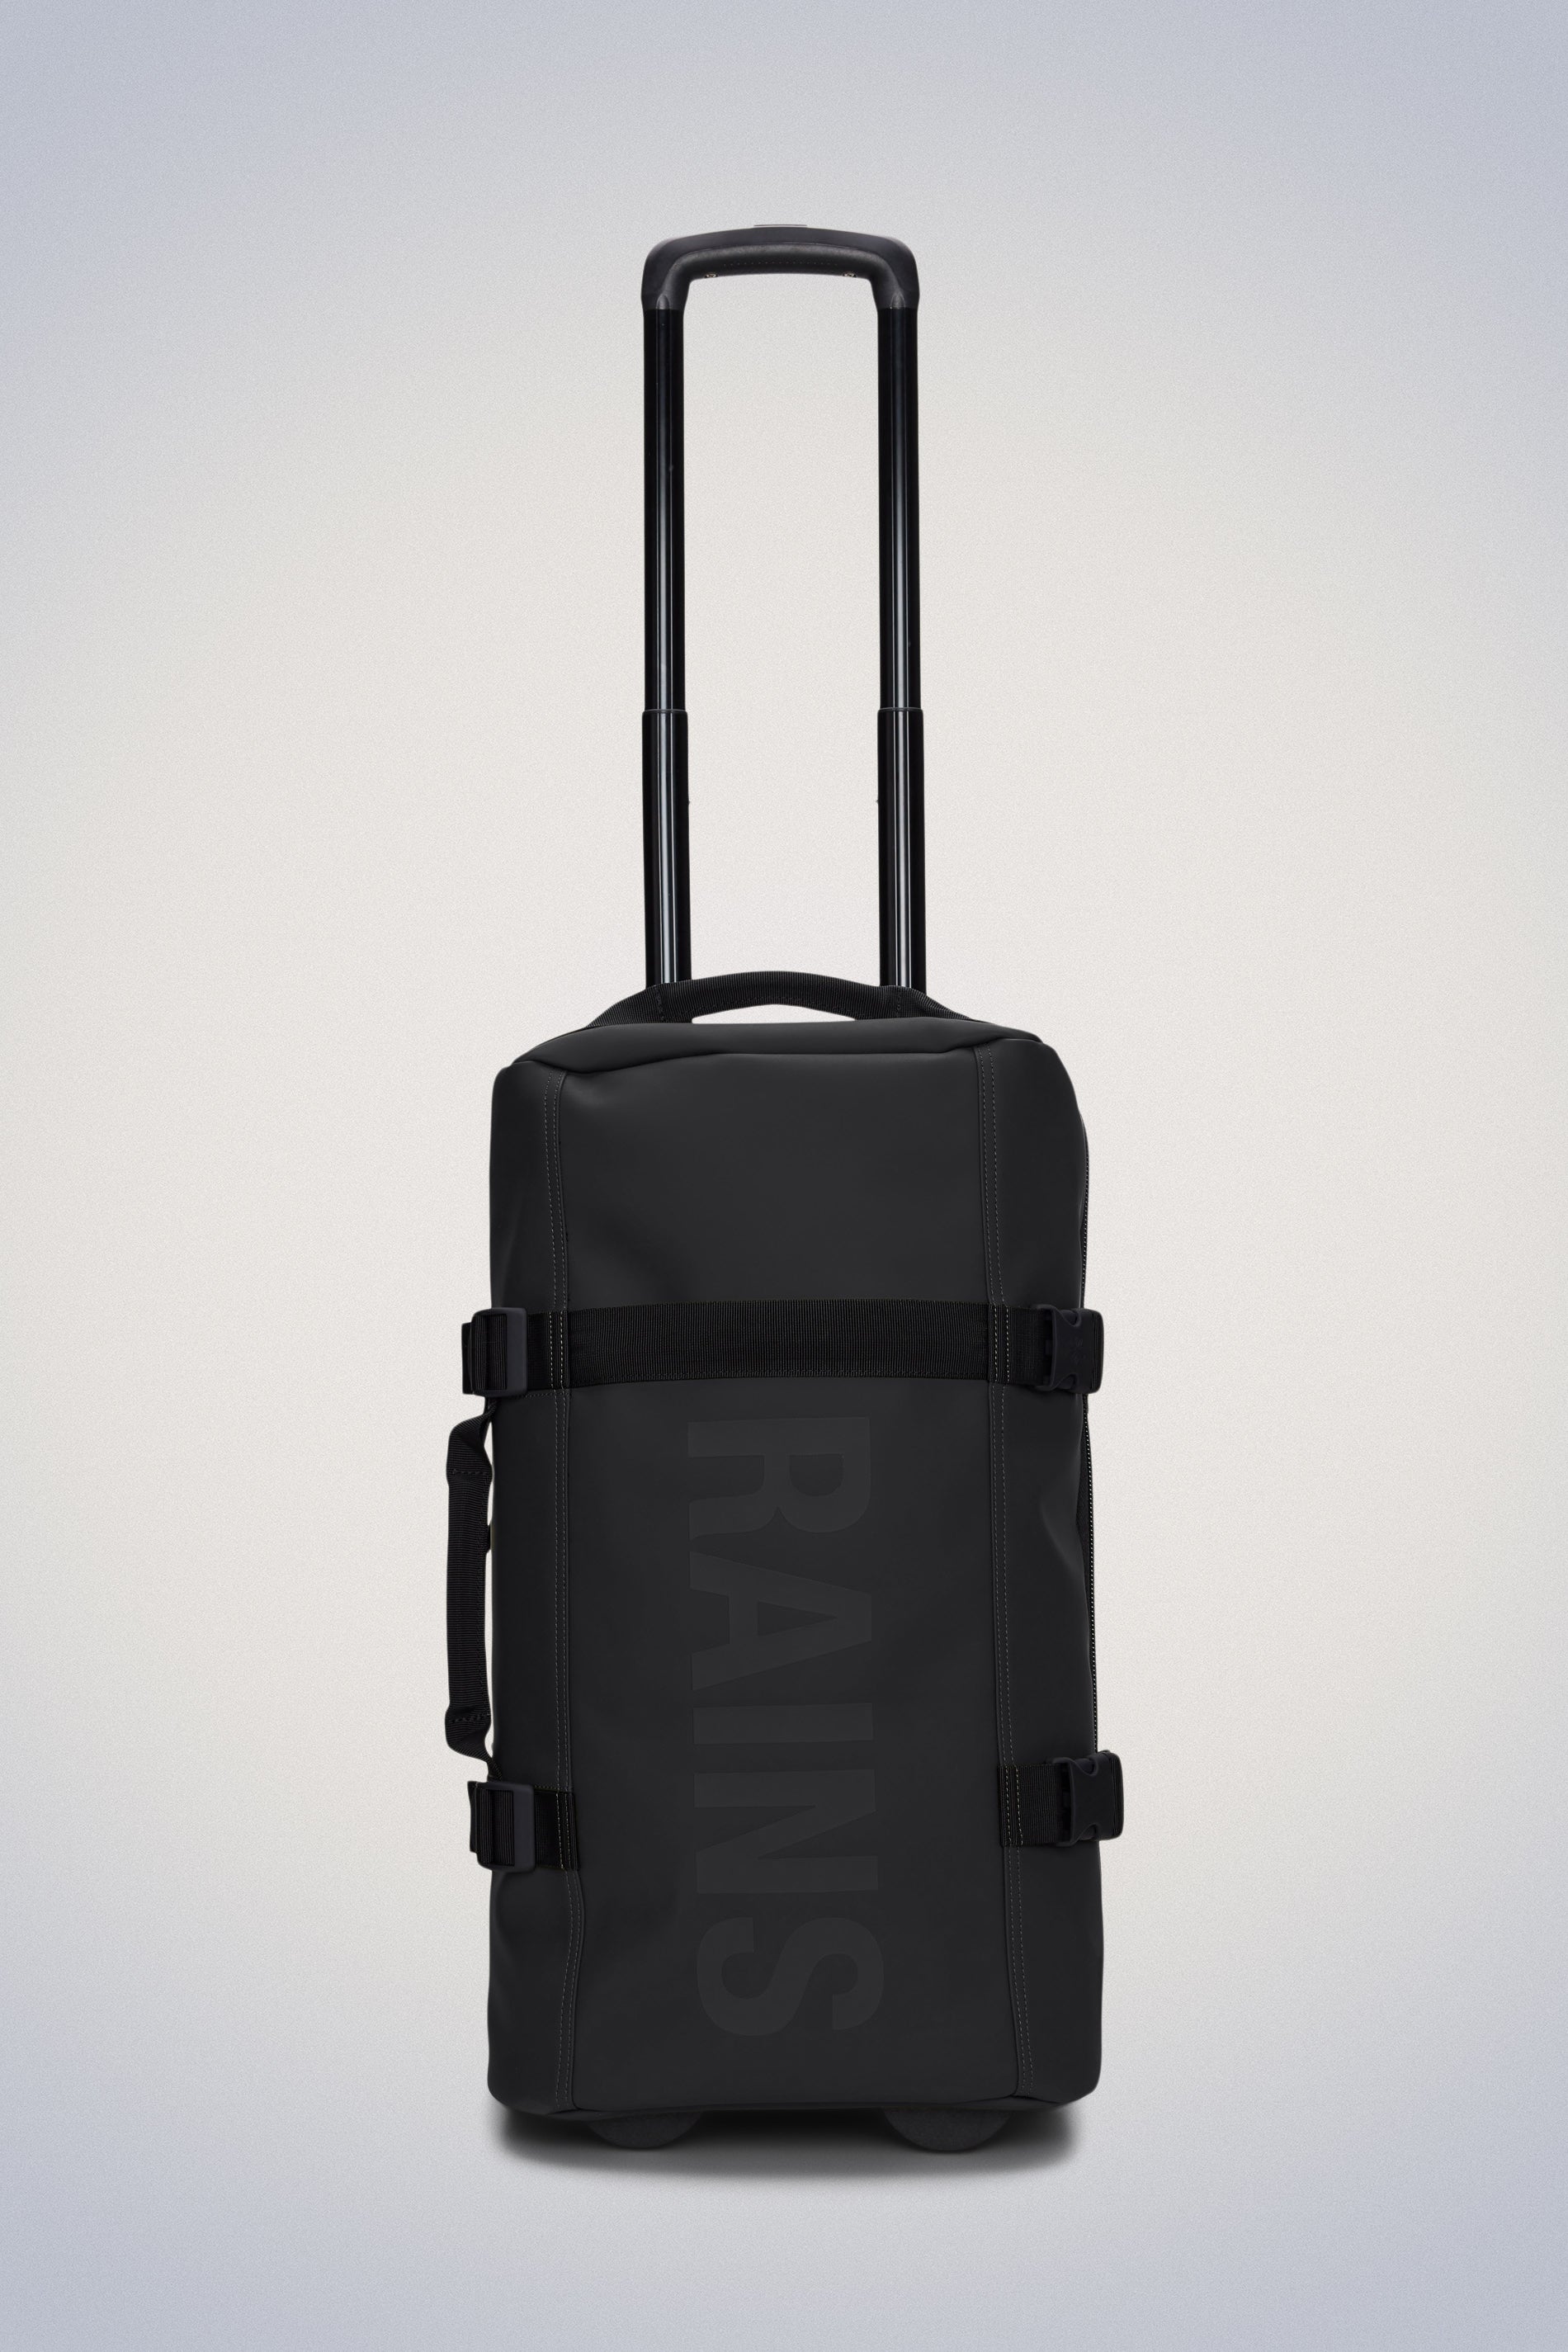 Cabin and Hand Luggage | Carry-on – Antler UK